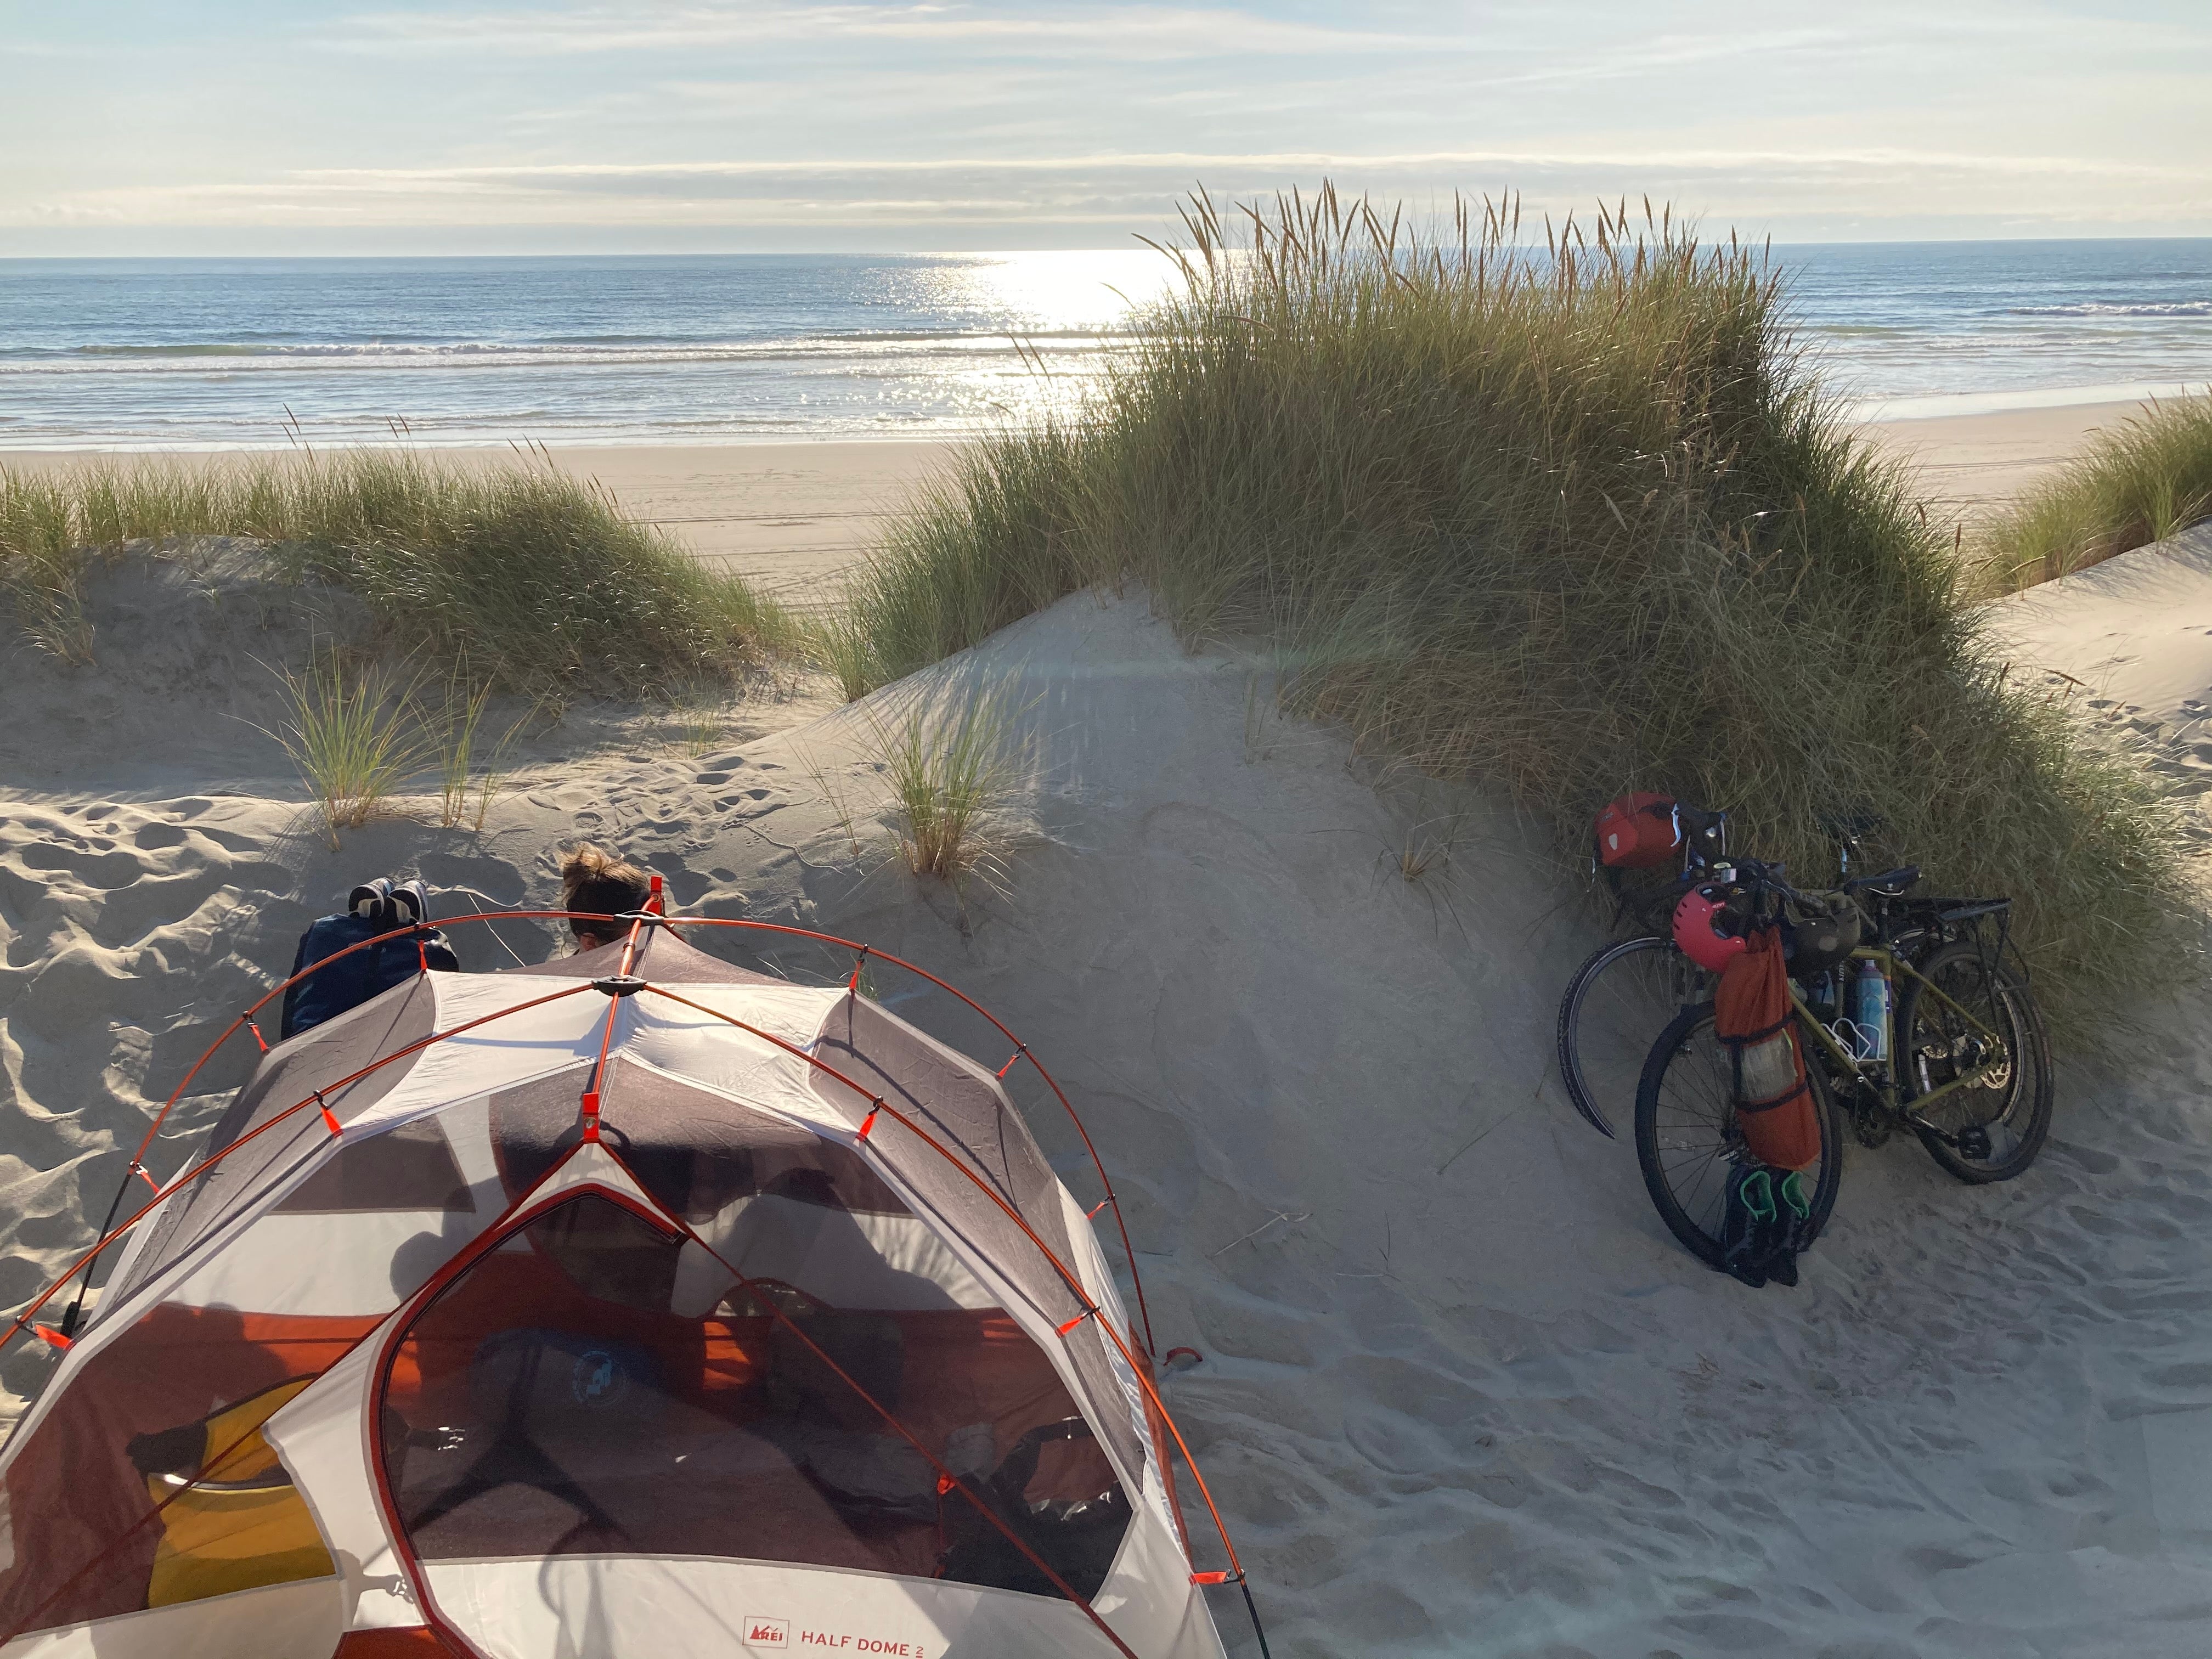 Camper submitted image from South Jetty Sand Camping - 3